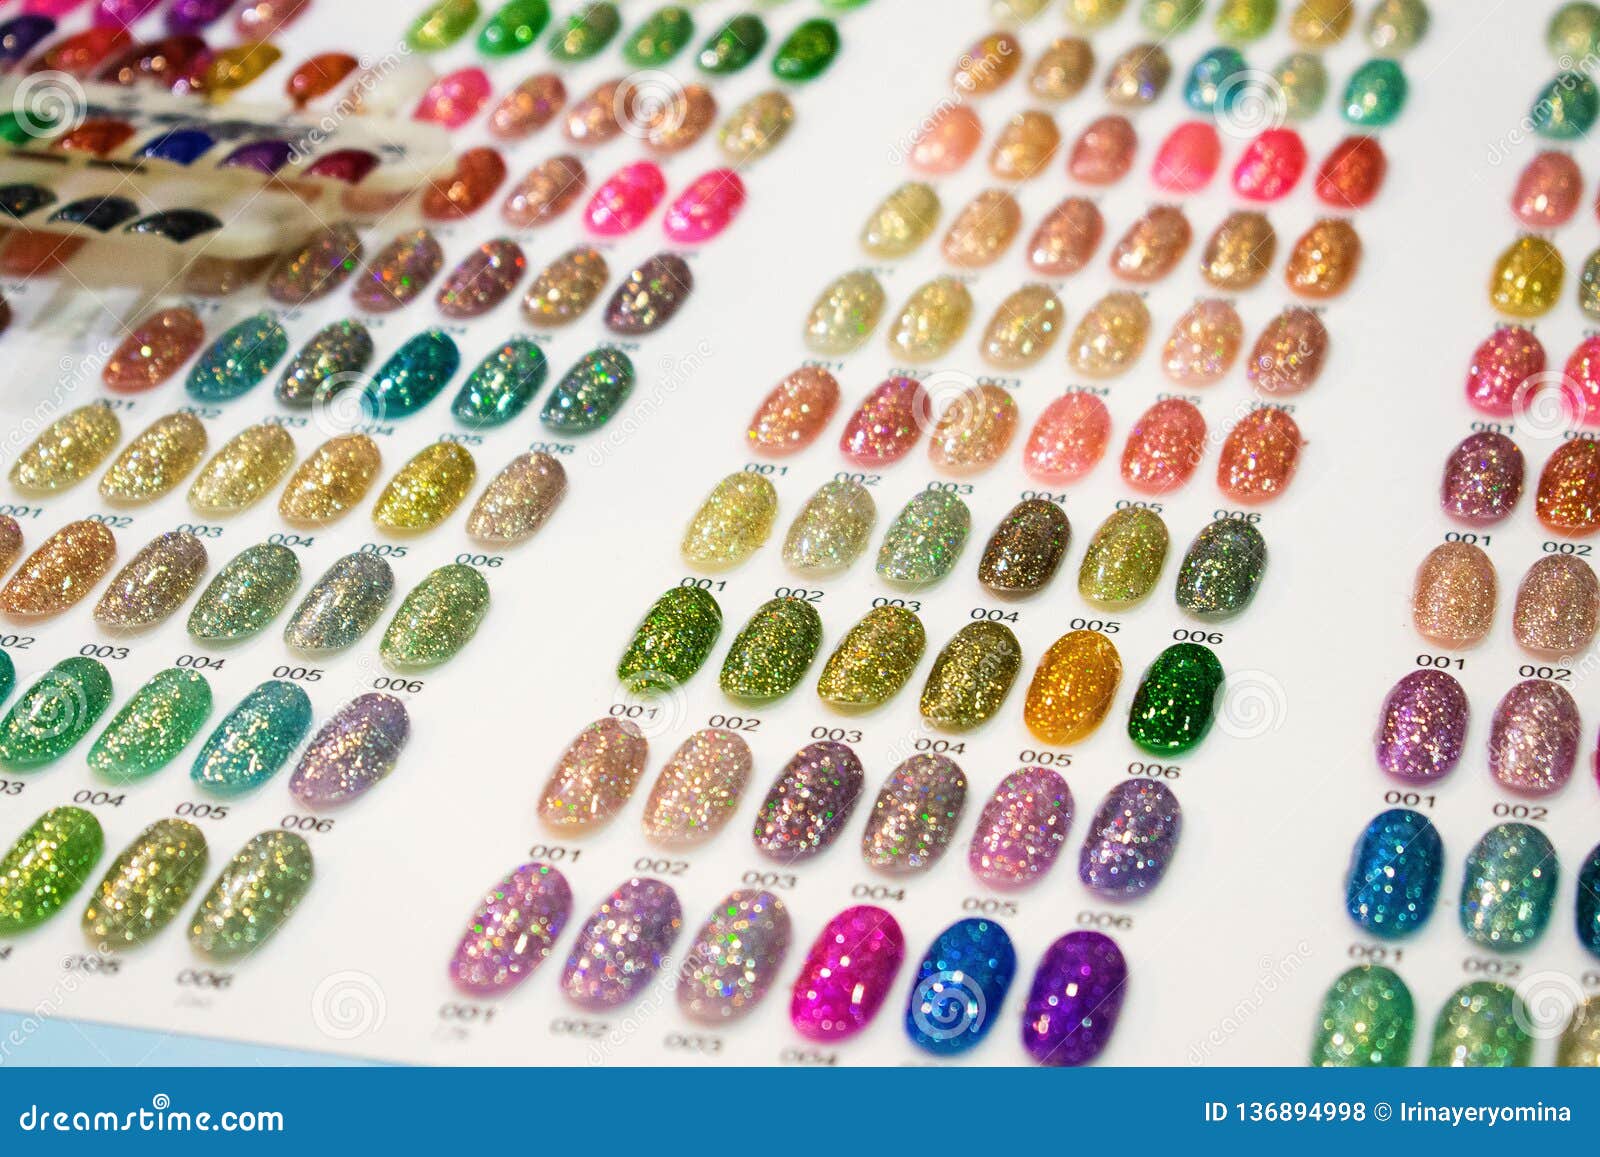 1. The Dos and Don'ts of Nail Polish Color Selection - wide 11